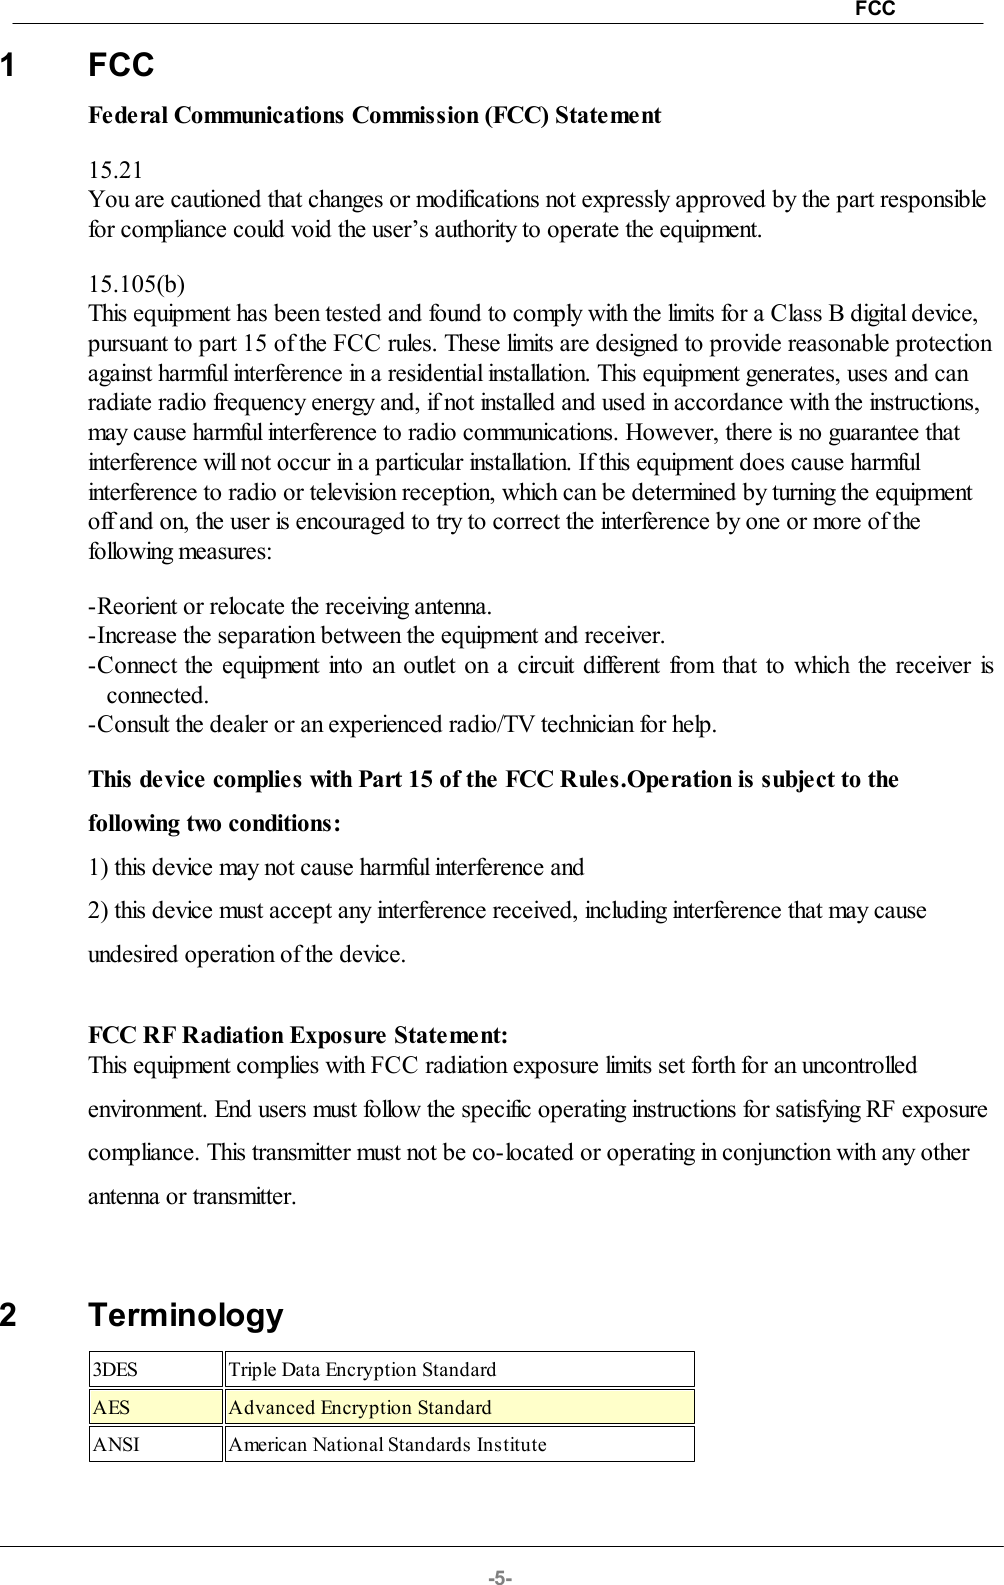 FCC-5-1 FCCFederal Communications Commission (FCC) Statement15.21You are cautioned that changes or modifications not expressly approved by the part responsiblefor compliance could void the user’s authority to operate the equipment.15.105(b)This equipment has been tested and found to comply with the limits for a Class B digital device,pursuant to part 15 of the FCC rules. These limits are designed to provide reasonable protectionagainst harmful interference in a residential installation. This equipment generates, uses and canradiate radio frequency energy and, if not installed and used in accordance with the instructions,may cause harmful interference to radio communications. However, there is no guarantee thatinterference will not occur in a particular installation. If this equipment does cause harmfulinterference to radio or television reception, which can be determined by turning the equipmentoff and on, the user is encouraged to try to correct the interference by one or more of thefollowing measures:-Reorient or relocate the receiving antenna.-Increase the separation between the equipment and receiver.-Connect the equipment into an outlet on a circuit different from that to which the receiver isconnected.-Consult the dealer or an experienced radio/TV technician for help.This device complies with Part 15 of the FCC Rules.Operation is subject to thefollowing two conditions:1) this device may not cause harmful interference and2) this device must accept any interference received, including interference that may causeundesired operation of the device.FCC RF Radiation Exposure Statement:This equipment complies with FCC radiation exposure limits set forth for an uncontrolledenvironment. End users must follow the specific operating instructions for satisfying RF exposurecompliance. This transmitter must not be co-located or operating in conjunction with any otherantenna or transmitter. 2 Terminology3DESTriple Data Encryption StandardAESAdvanced Encryption StandardANSIAmerican National Standards Institute